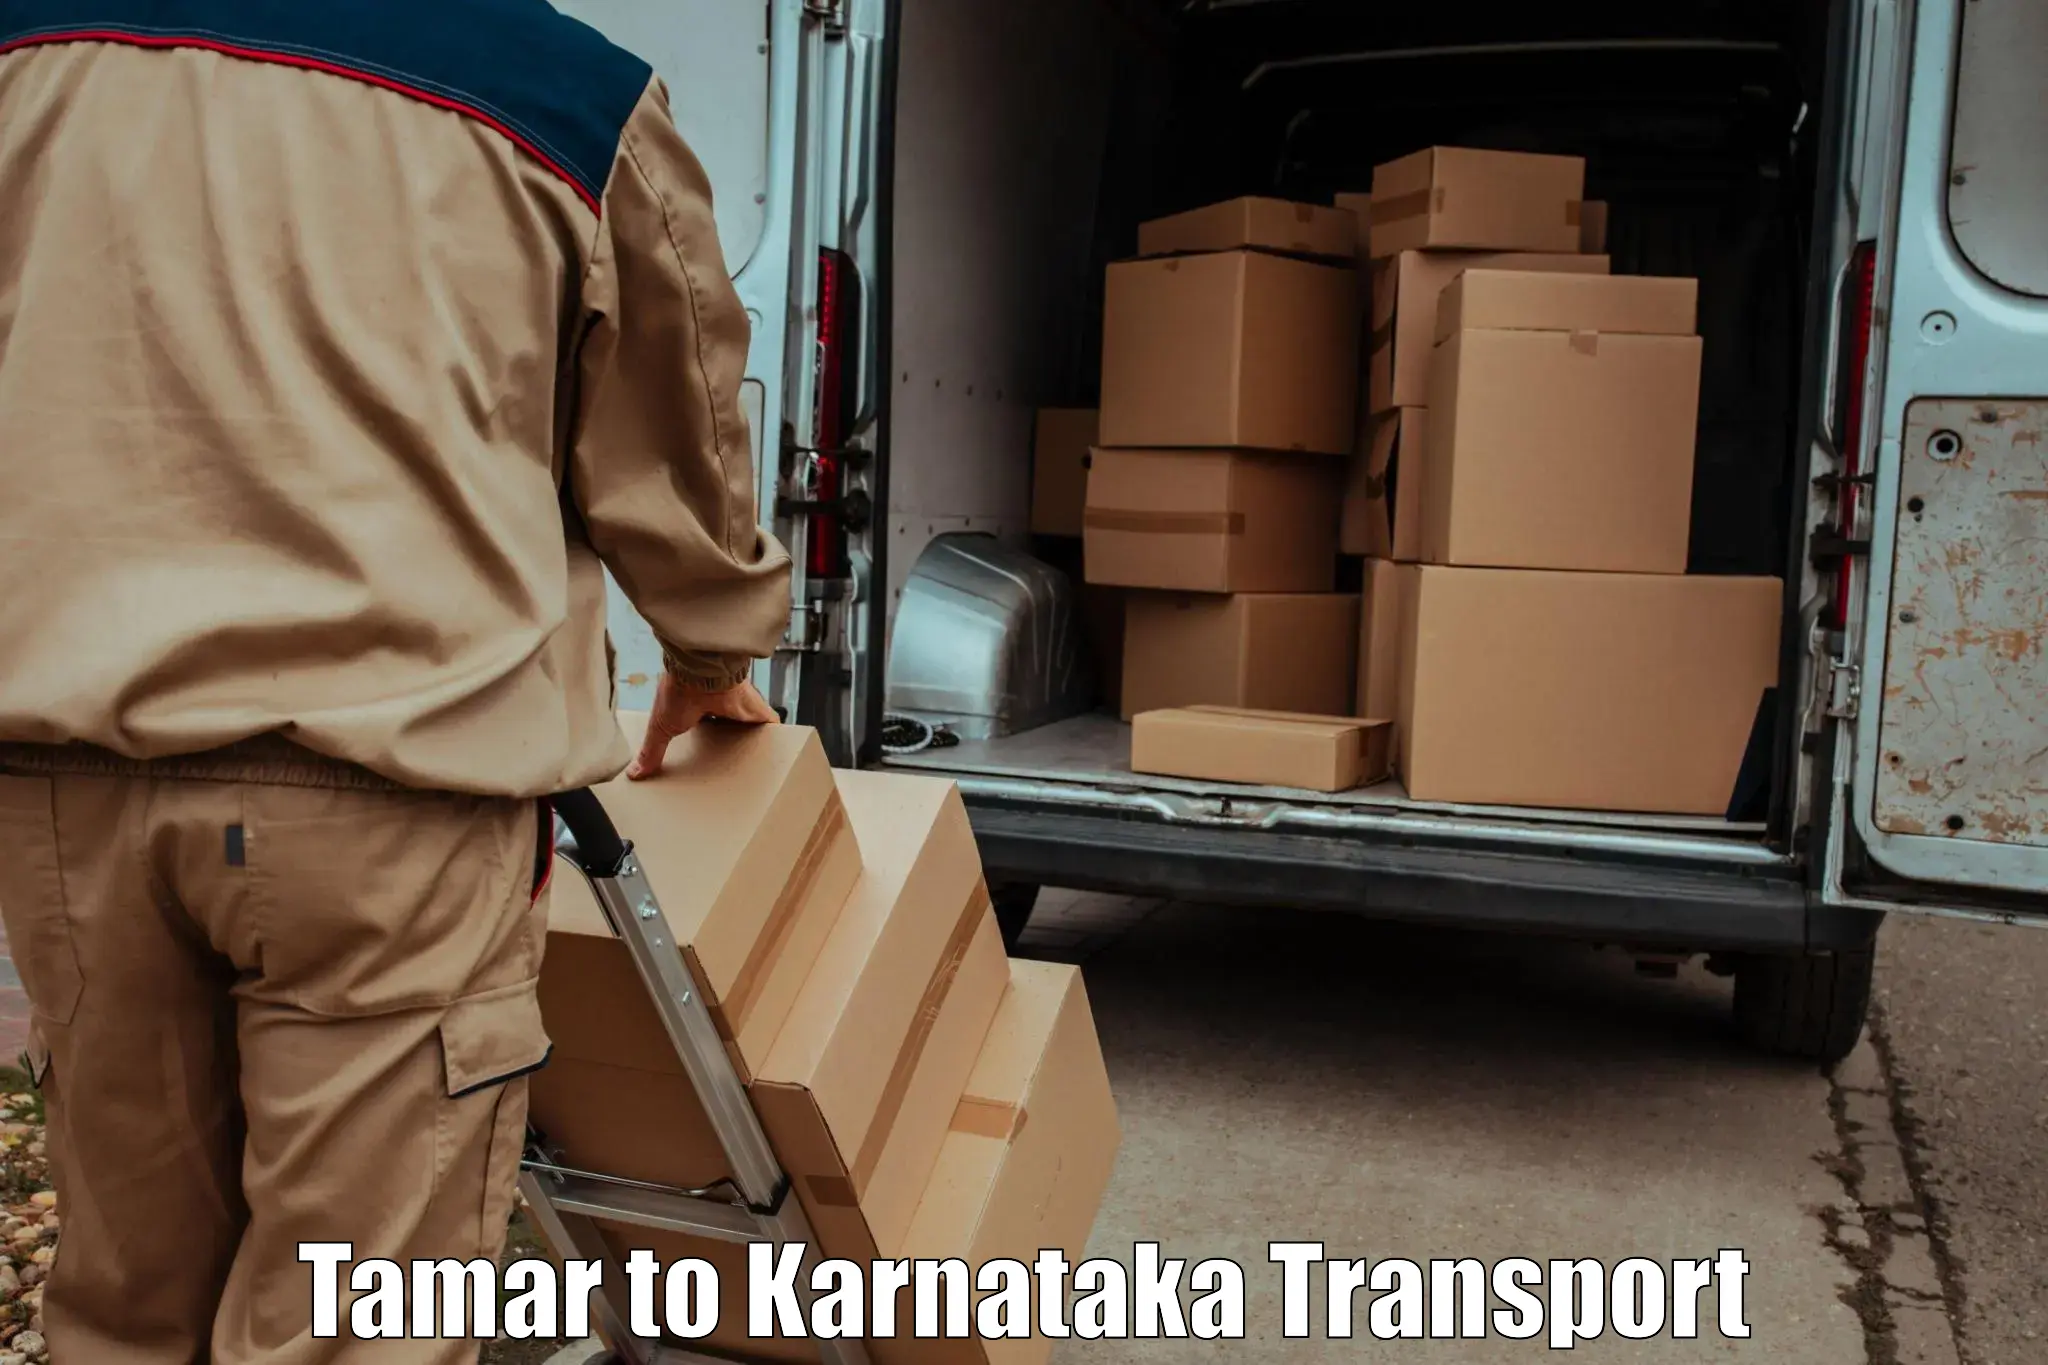 Pick up transport service Tamar to Dharwad